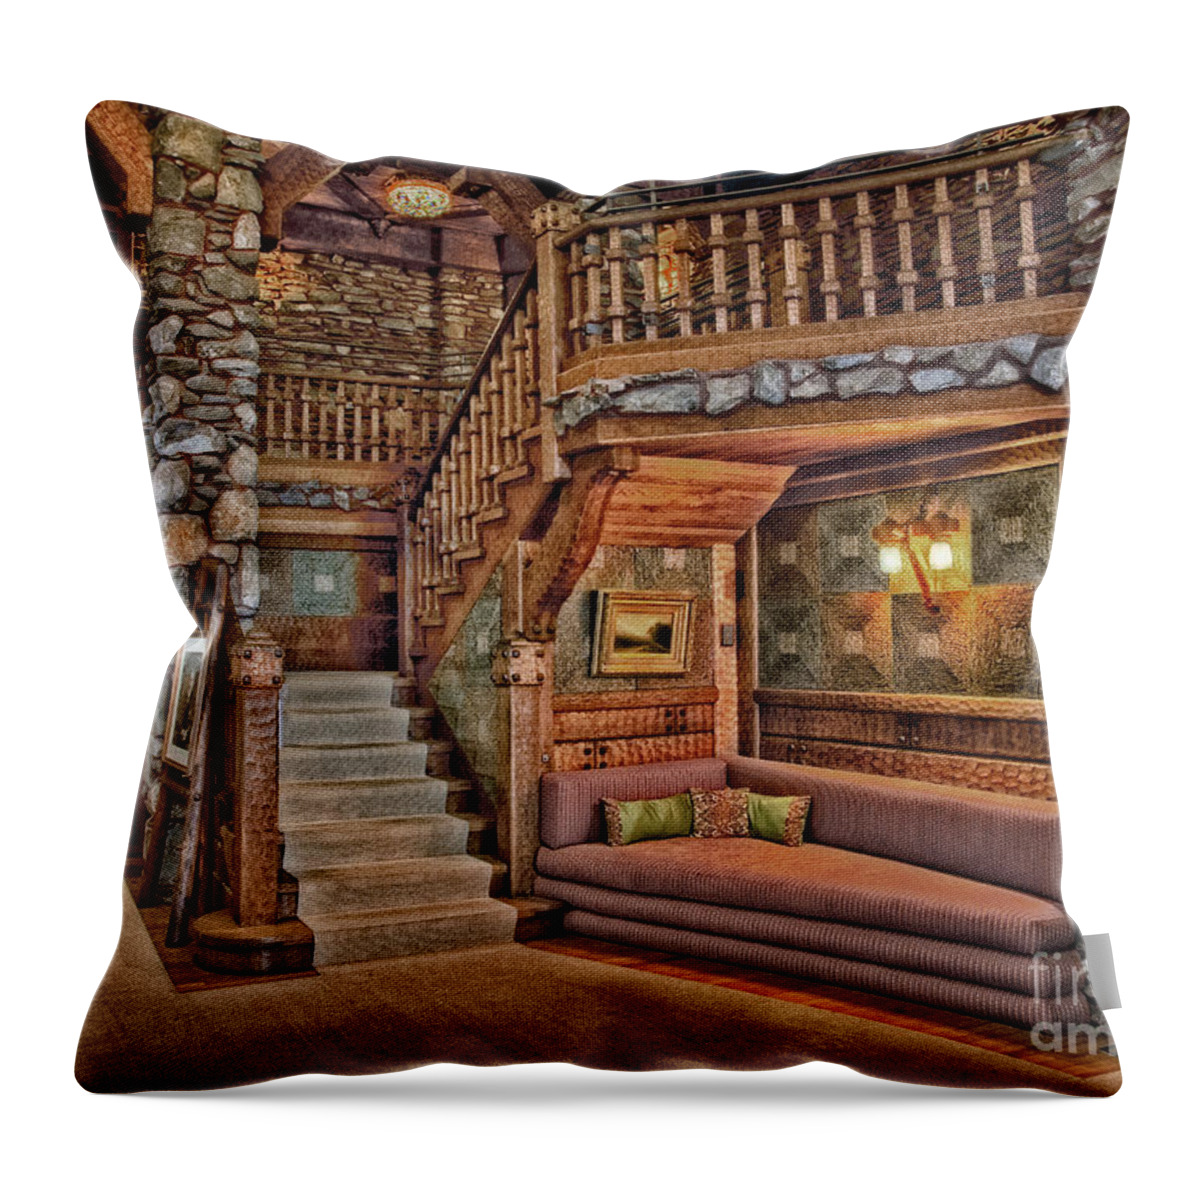 Gillette Castle Throw Pillow featuring the photograph Castle Living Room by Susan Candelario